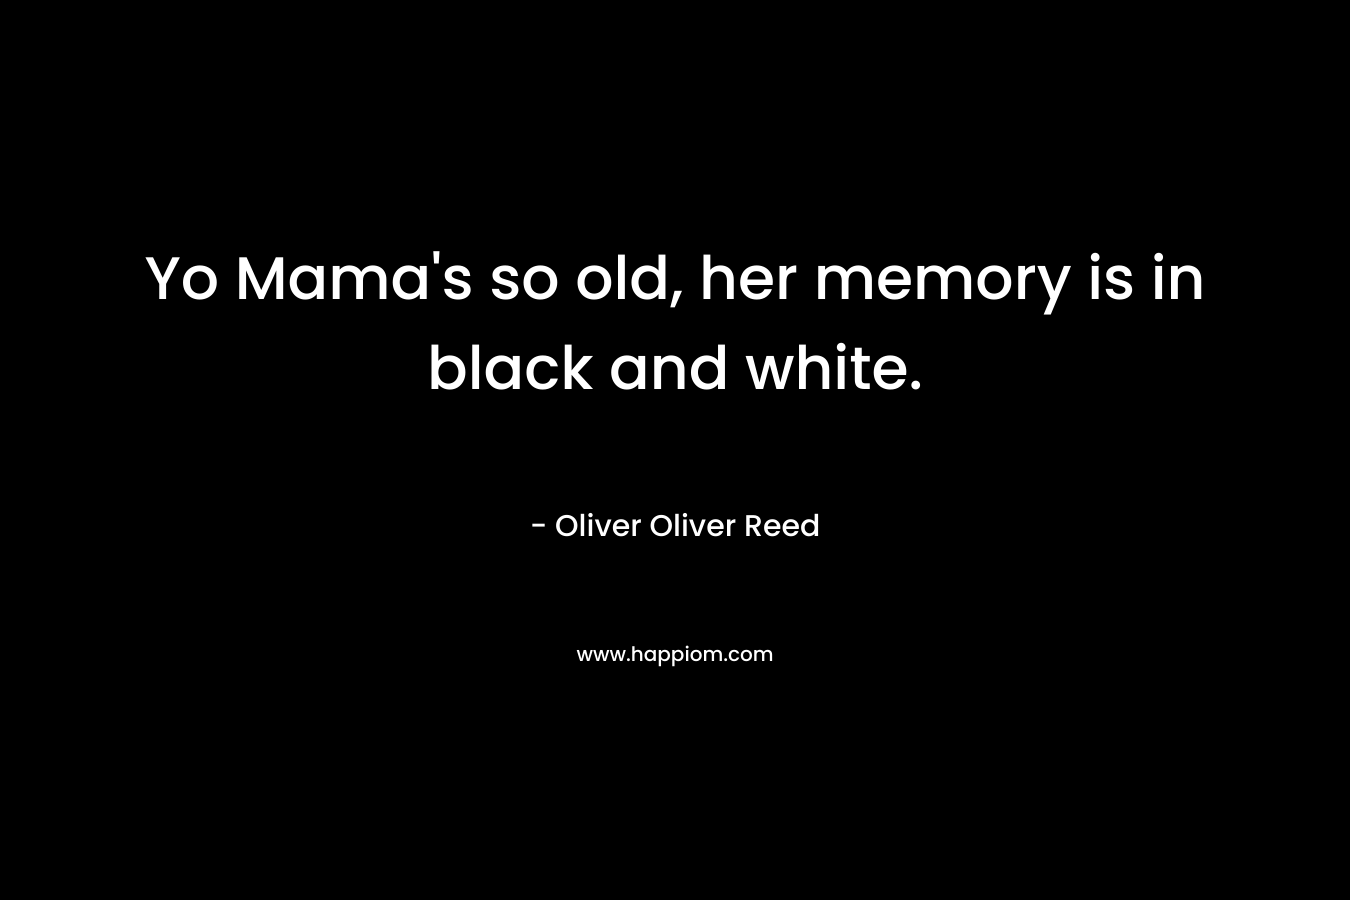 Yo Mama’s so old, her memory is in black and white. – Oliver Oliver Reed